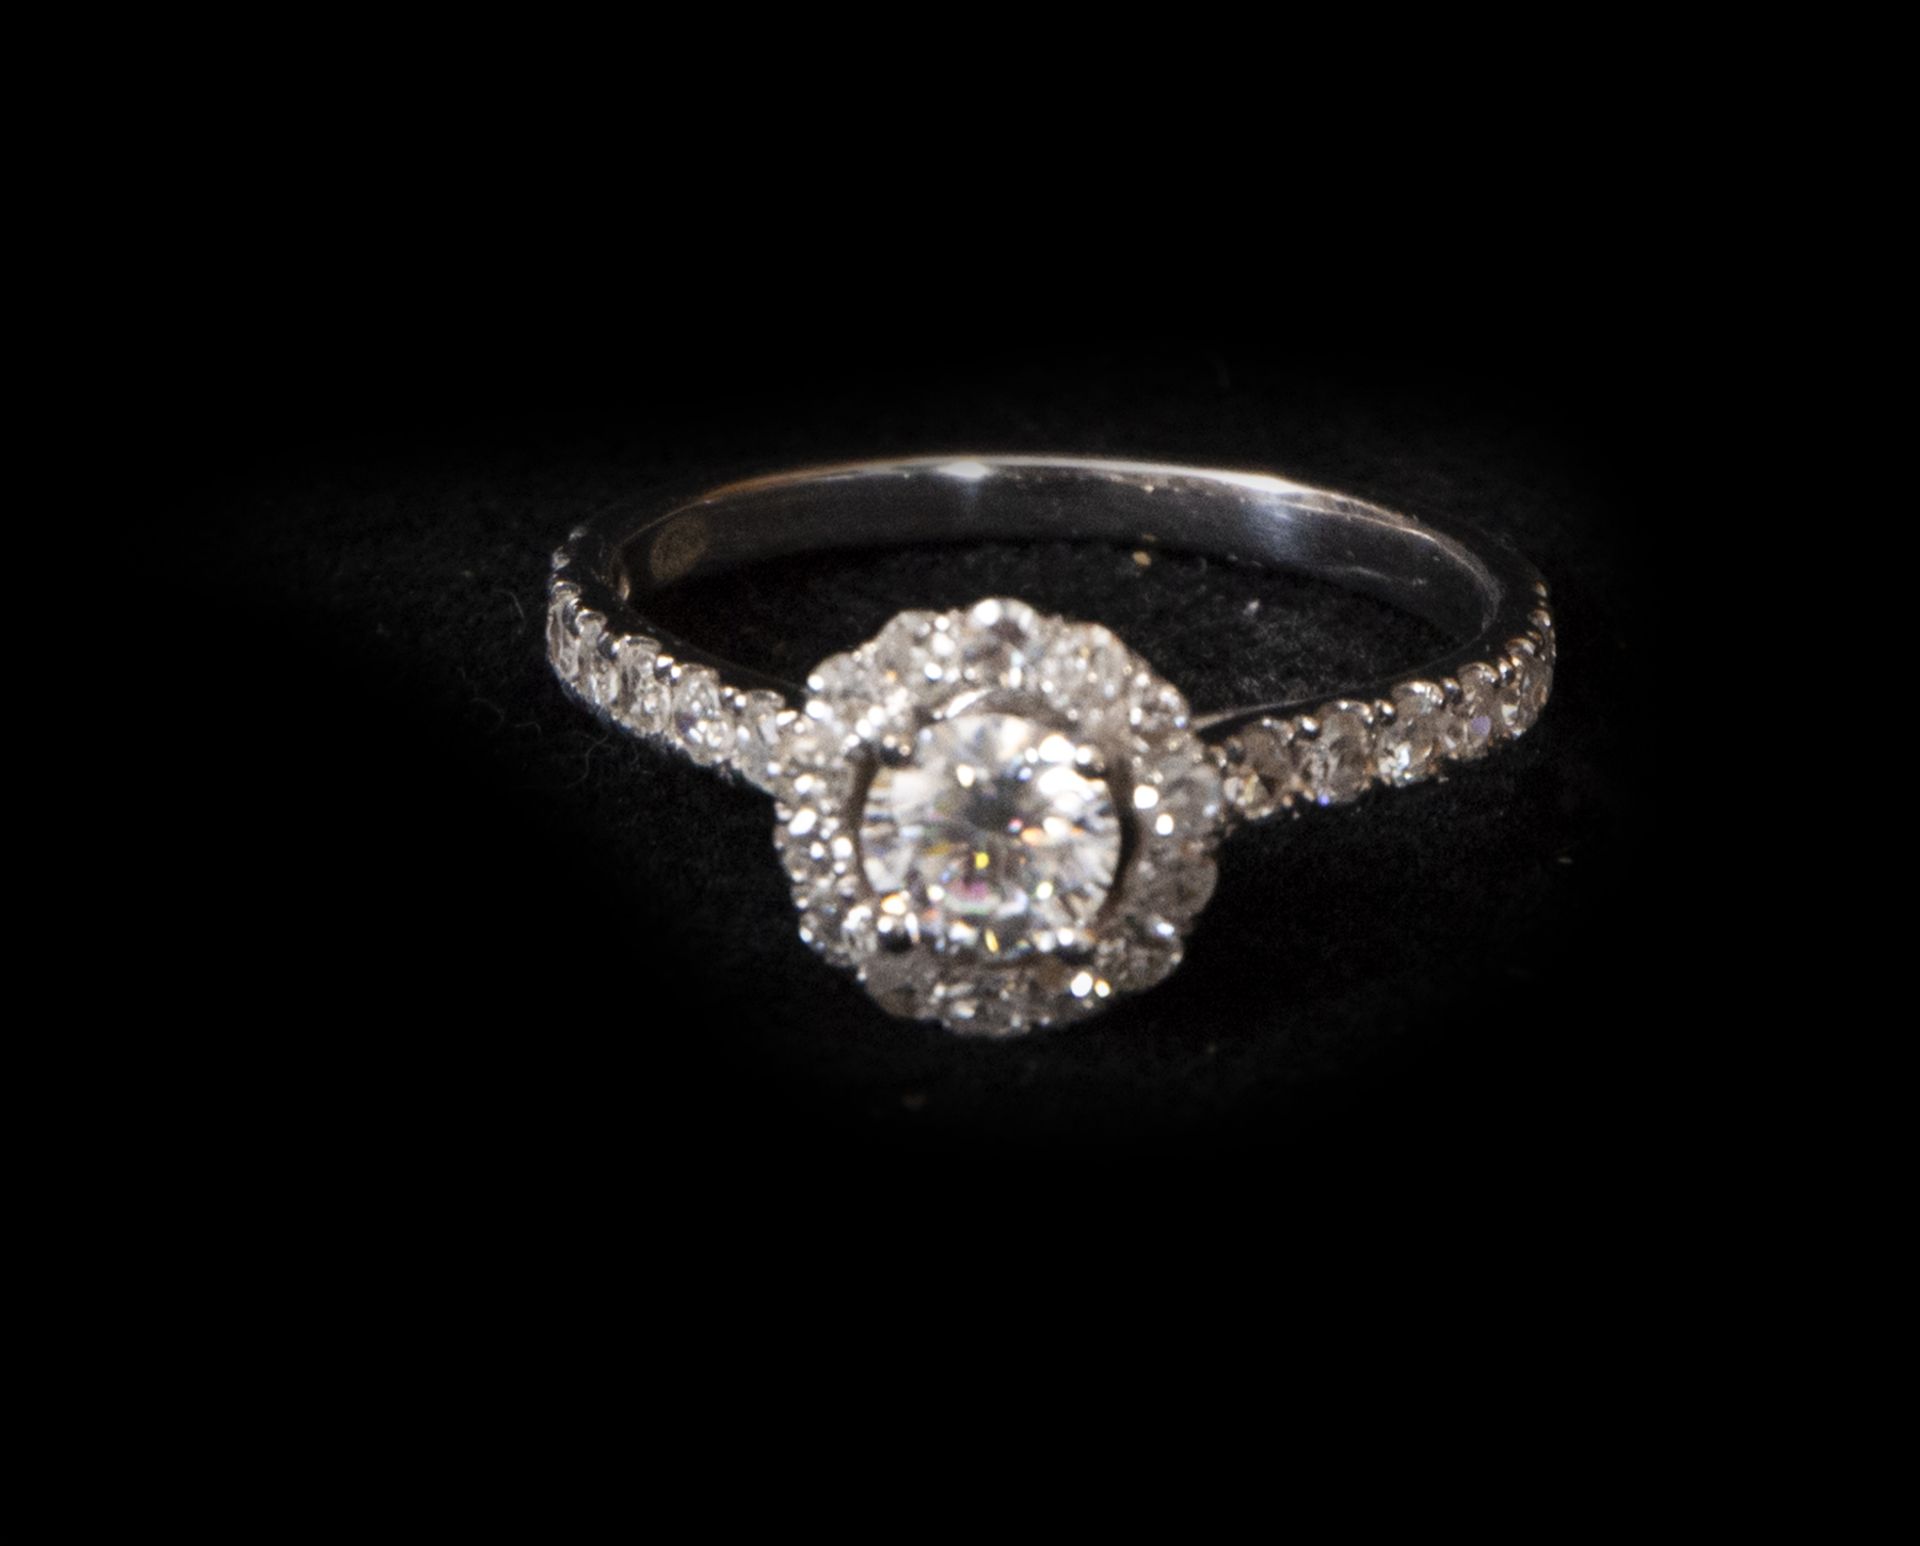 Ring with central diamond rosette of 0.50 ct and 1 ct in 0.10 brilliant cut diamonds, mounted in 18k